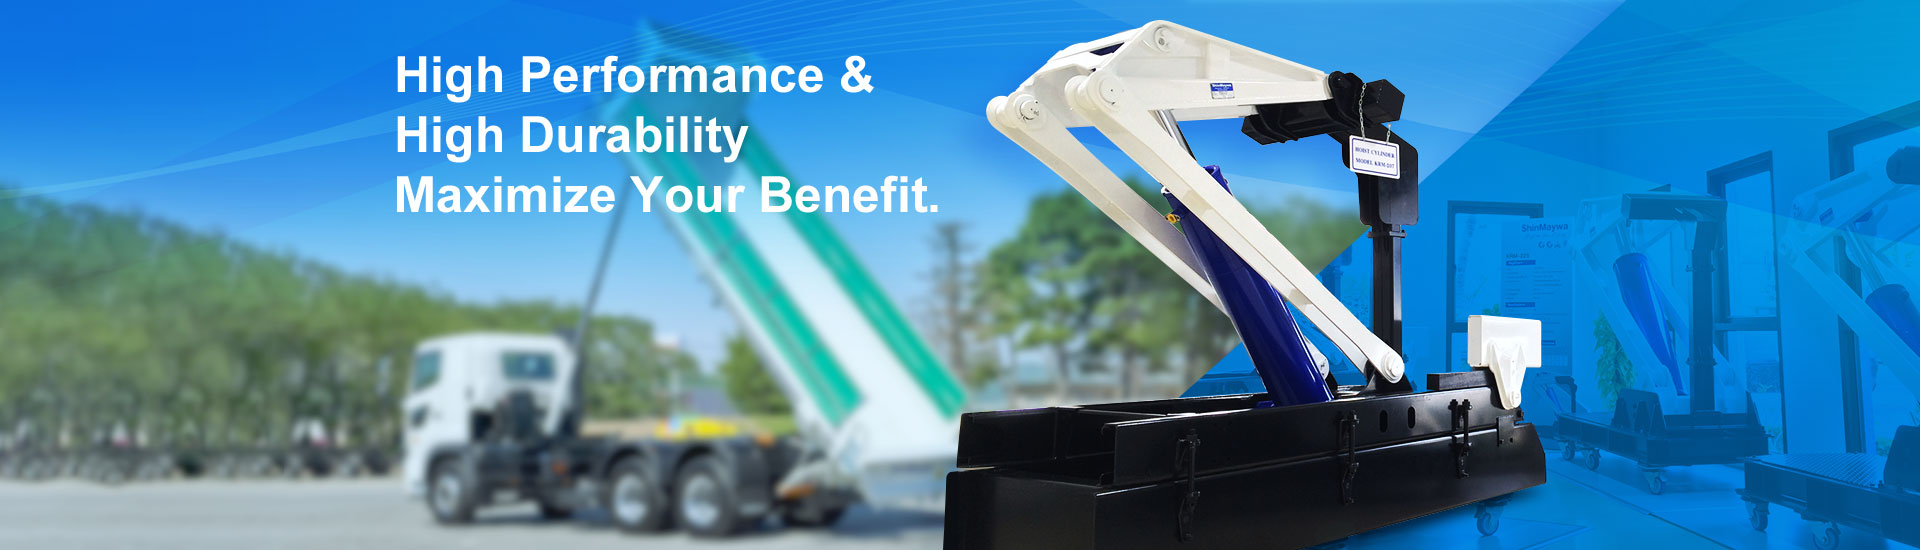 High Performance & High Durability Maximize Your Benefit.